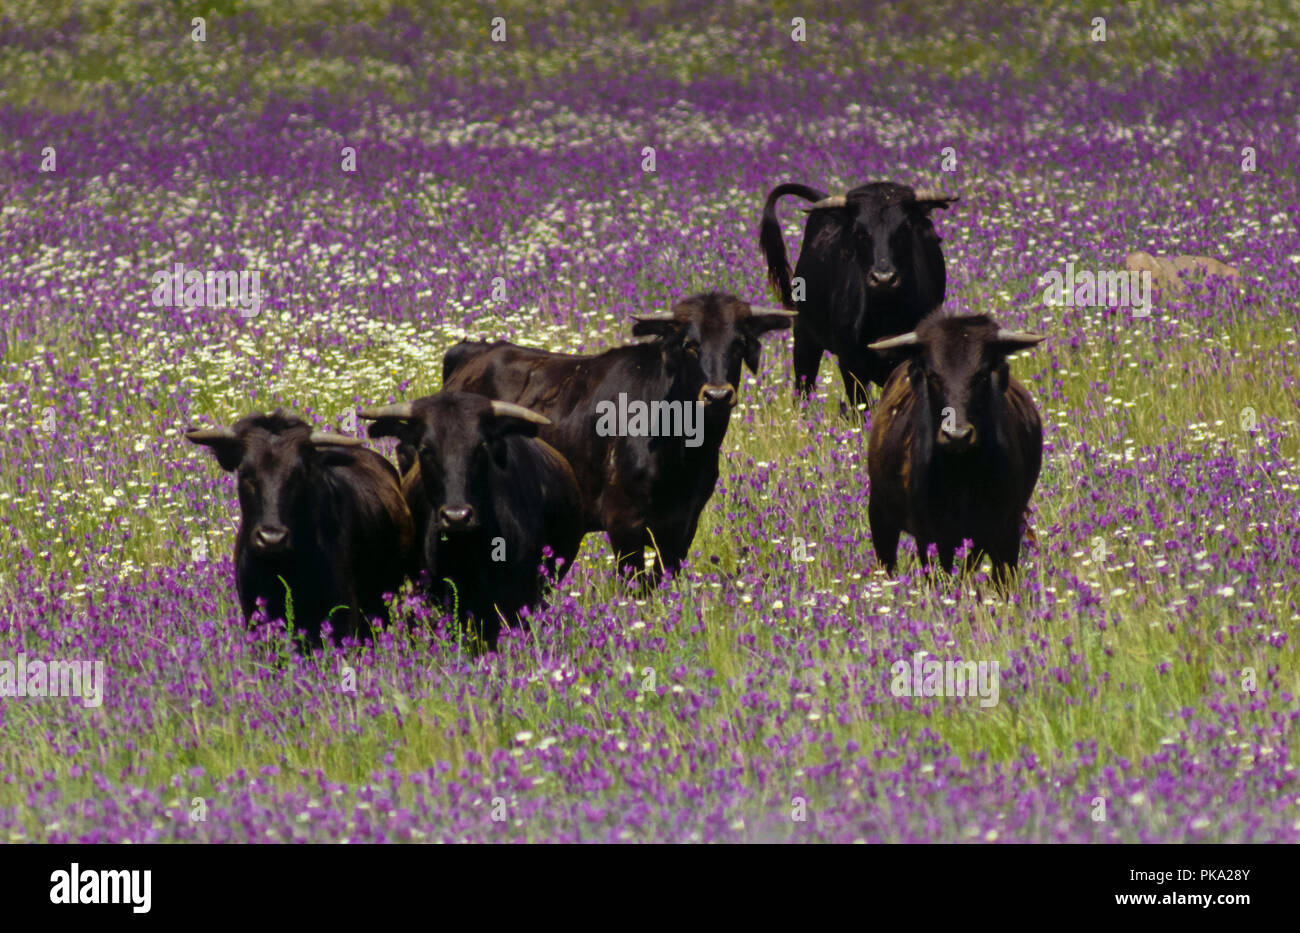 Spanish Fighting Bulls in the field. Southern Spain. Europe Stock Photo